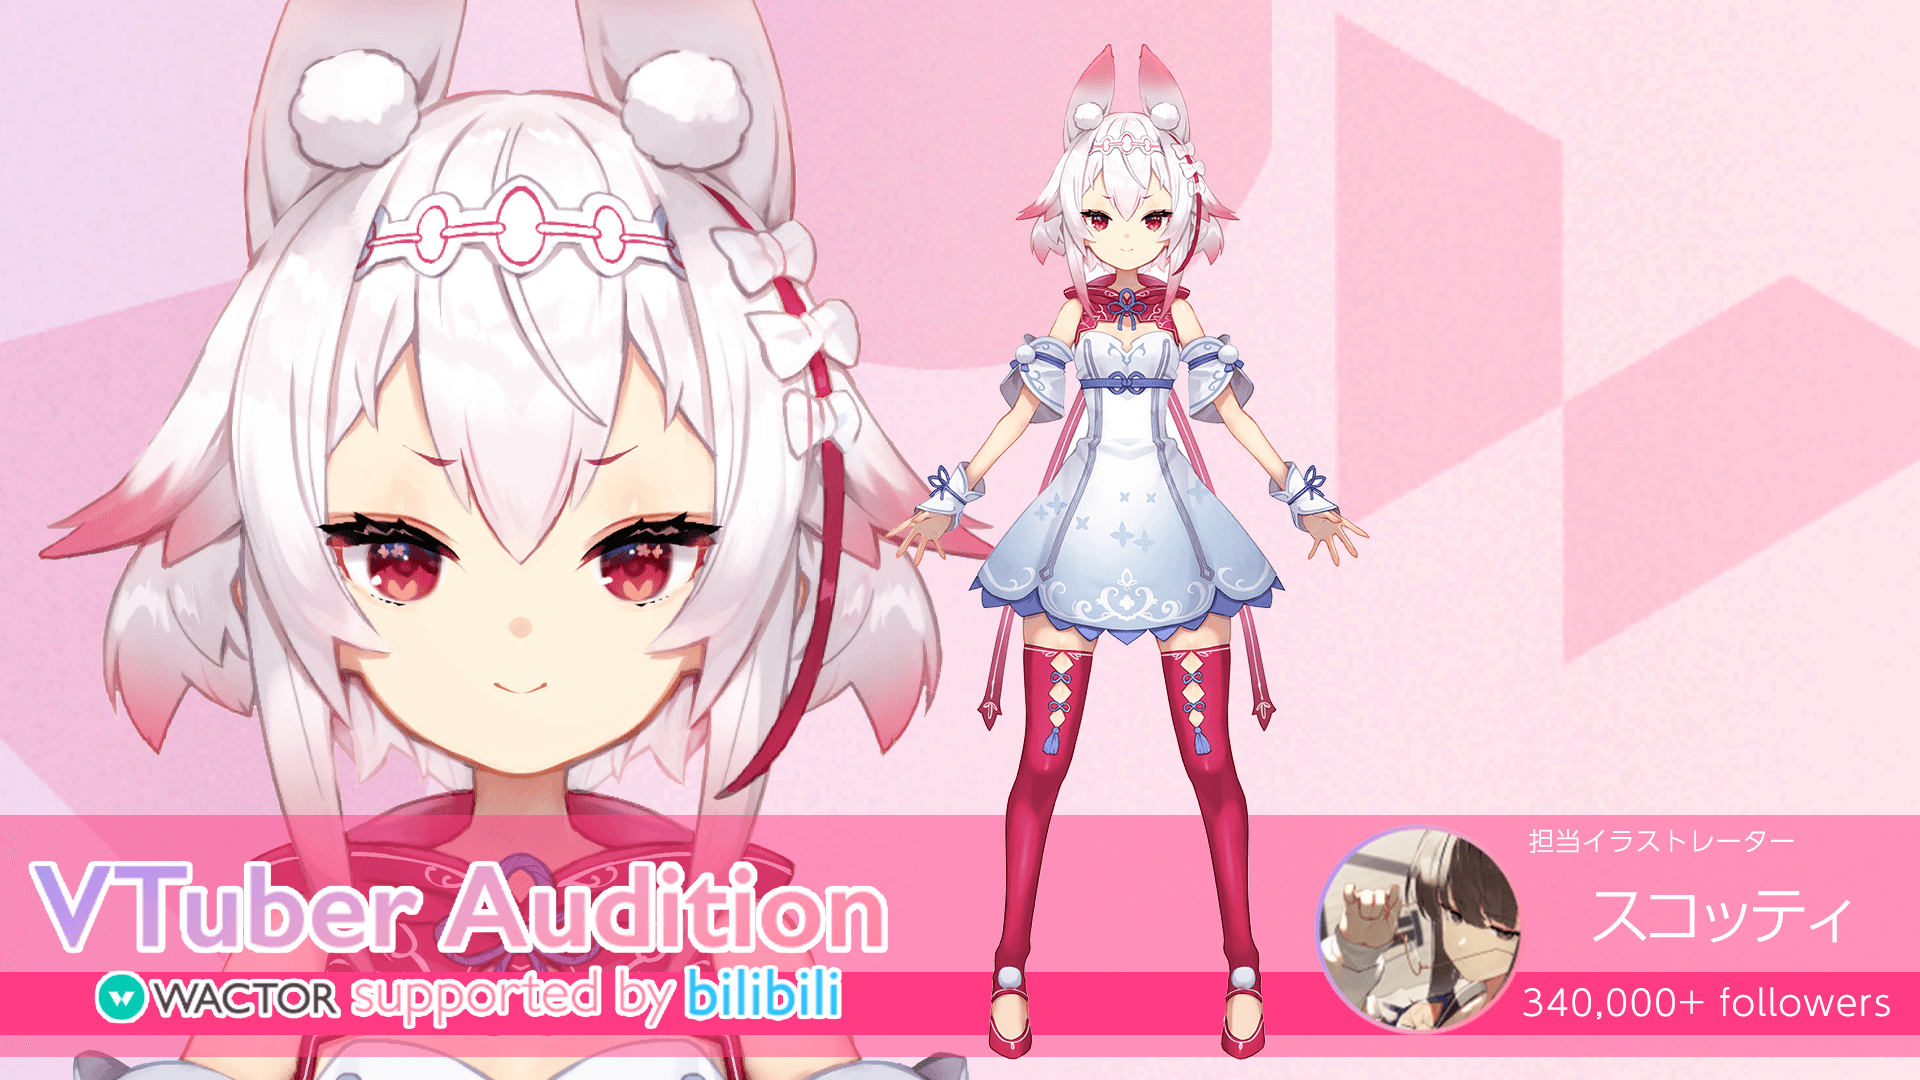 wactor-vtuber-audition-supported-by-bilibili-6-2